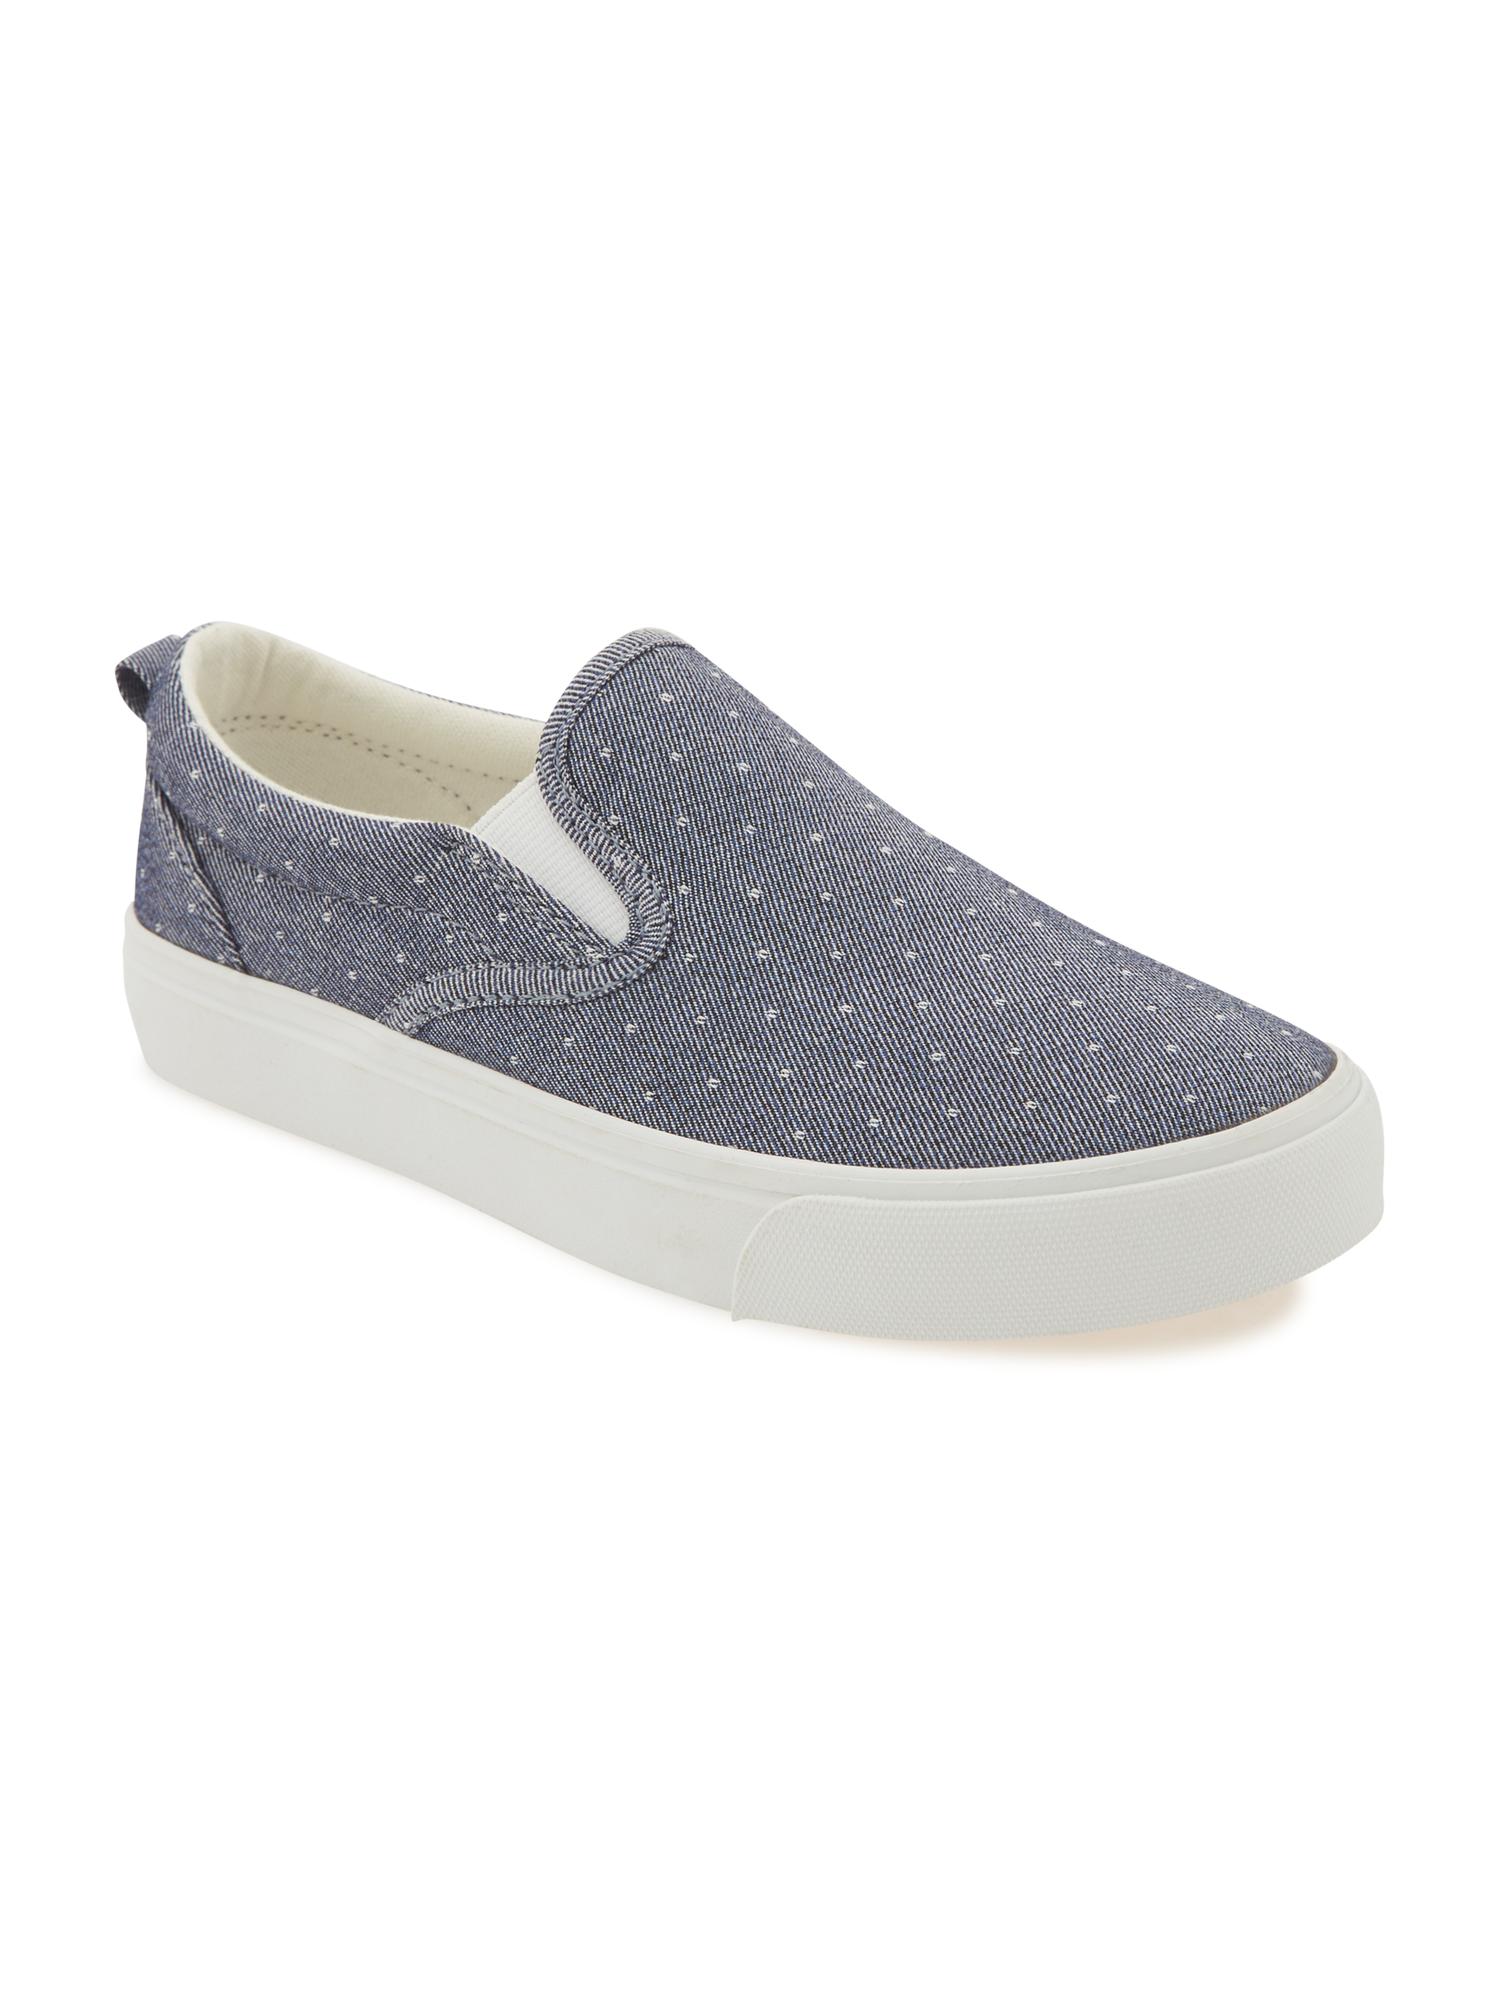 Chambray Slip-On Sneakers for Girls | Old Navy